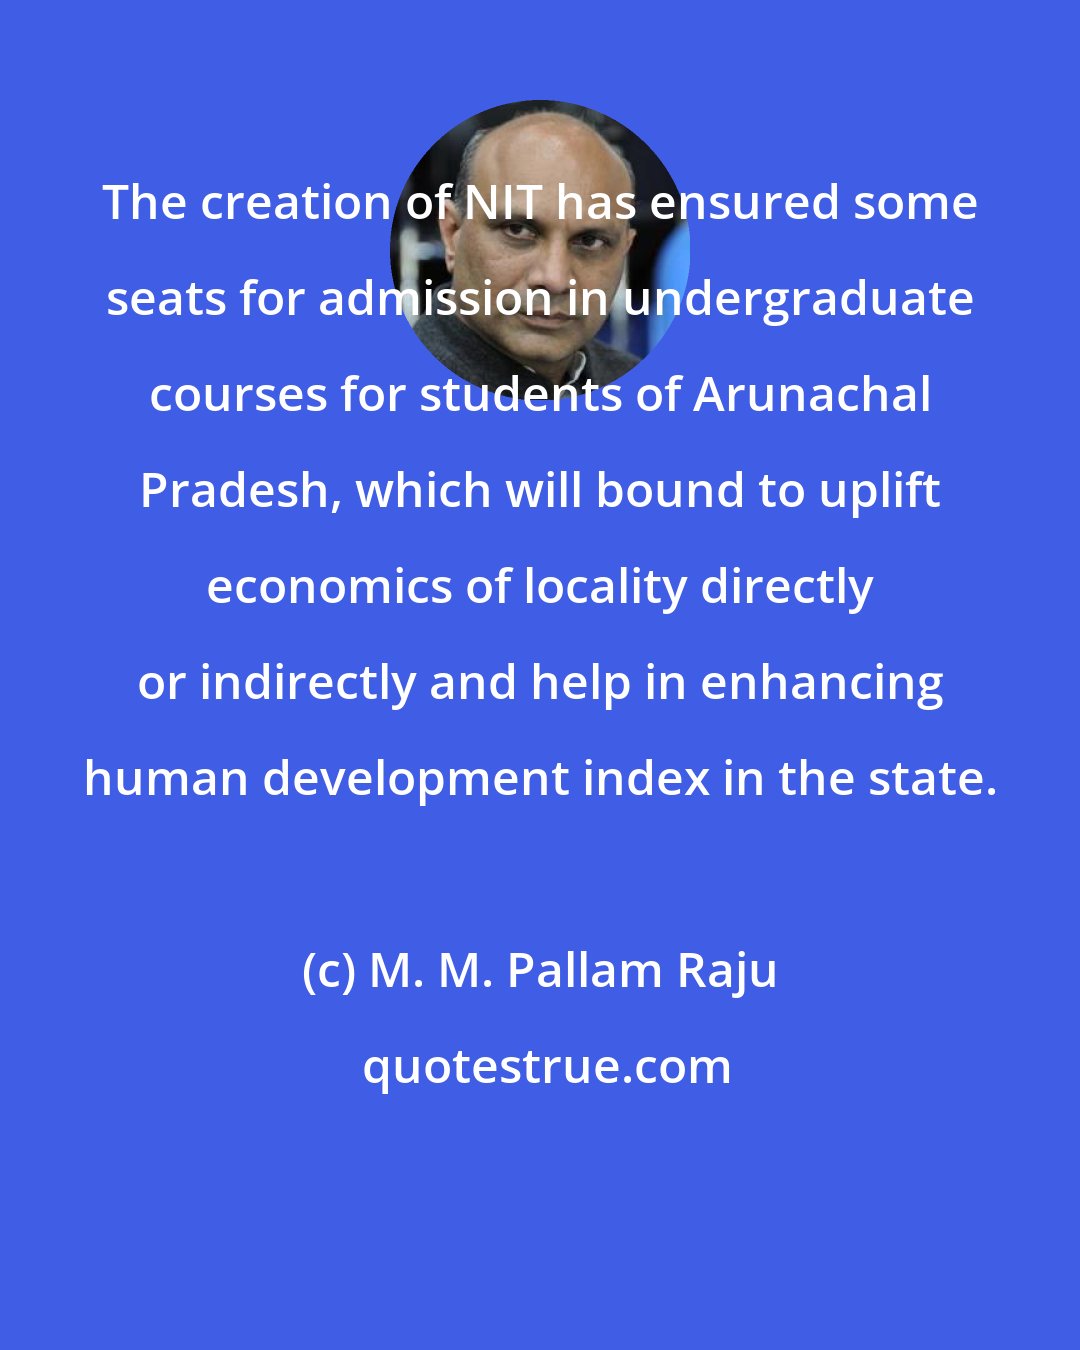 M. M. Pallam Raju: The creation of NIT has ensured some seats for admission in undergraduate courses for students of Arunachal Pradesh, which will bound to uplift economics of locality directly or indirectly and help in enhancing human development index in the state.